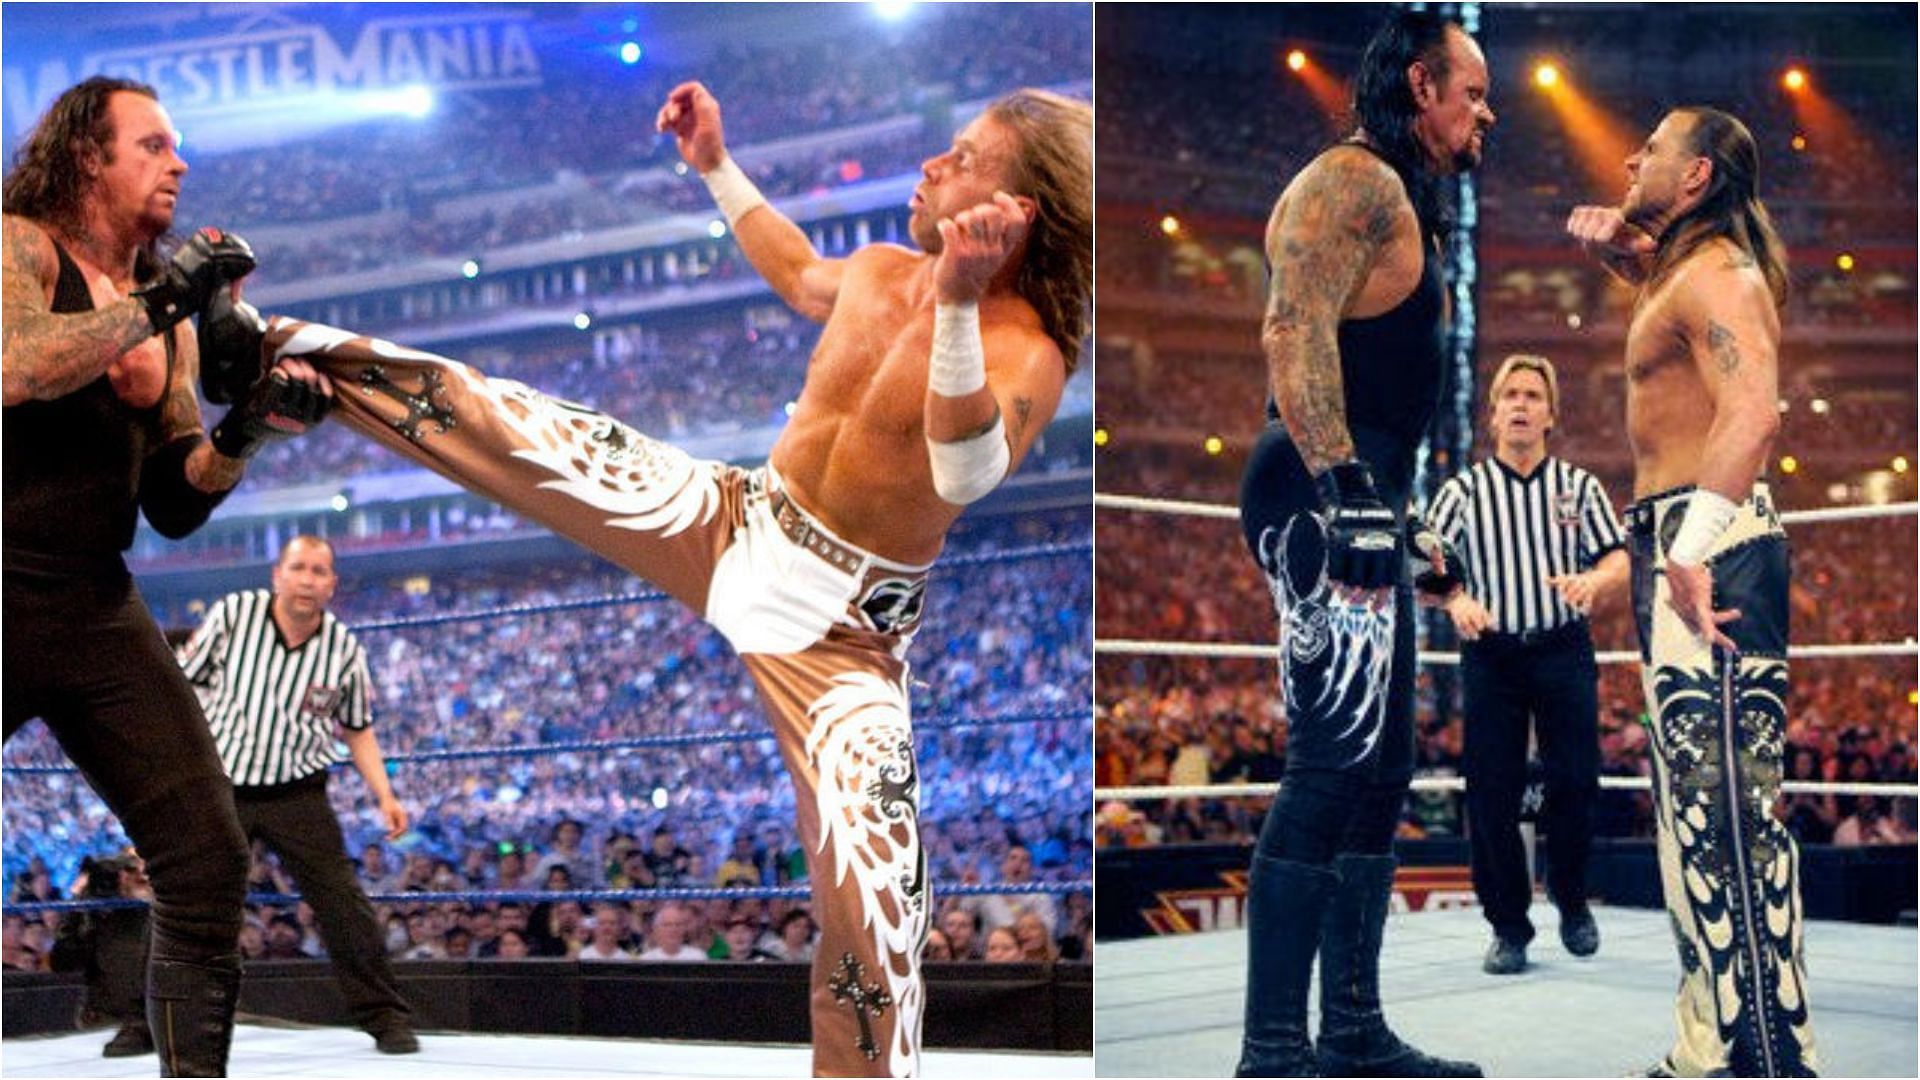 The two WrestleMania icons had back-to-back classics